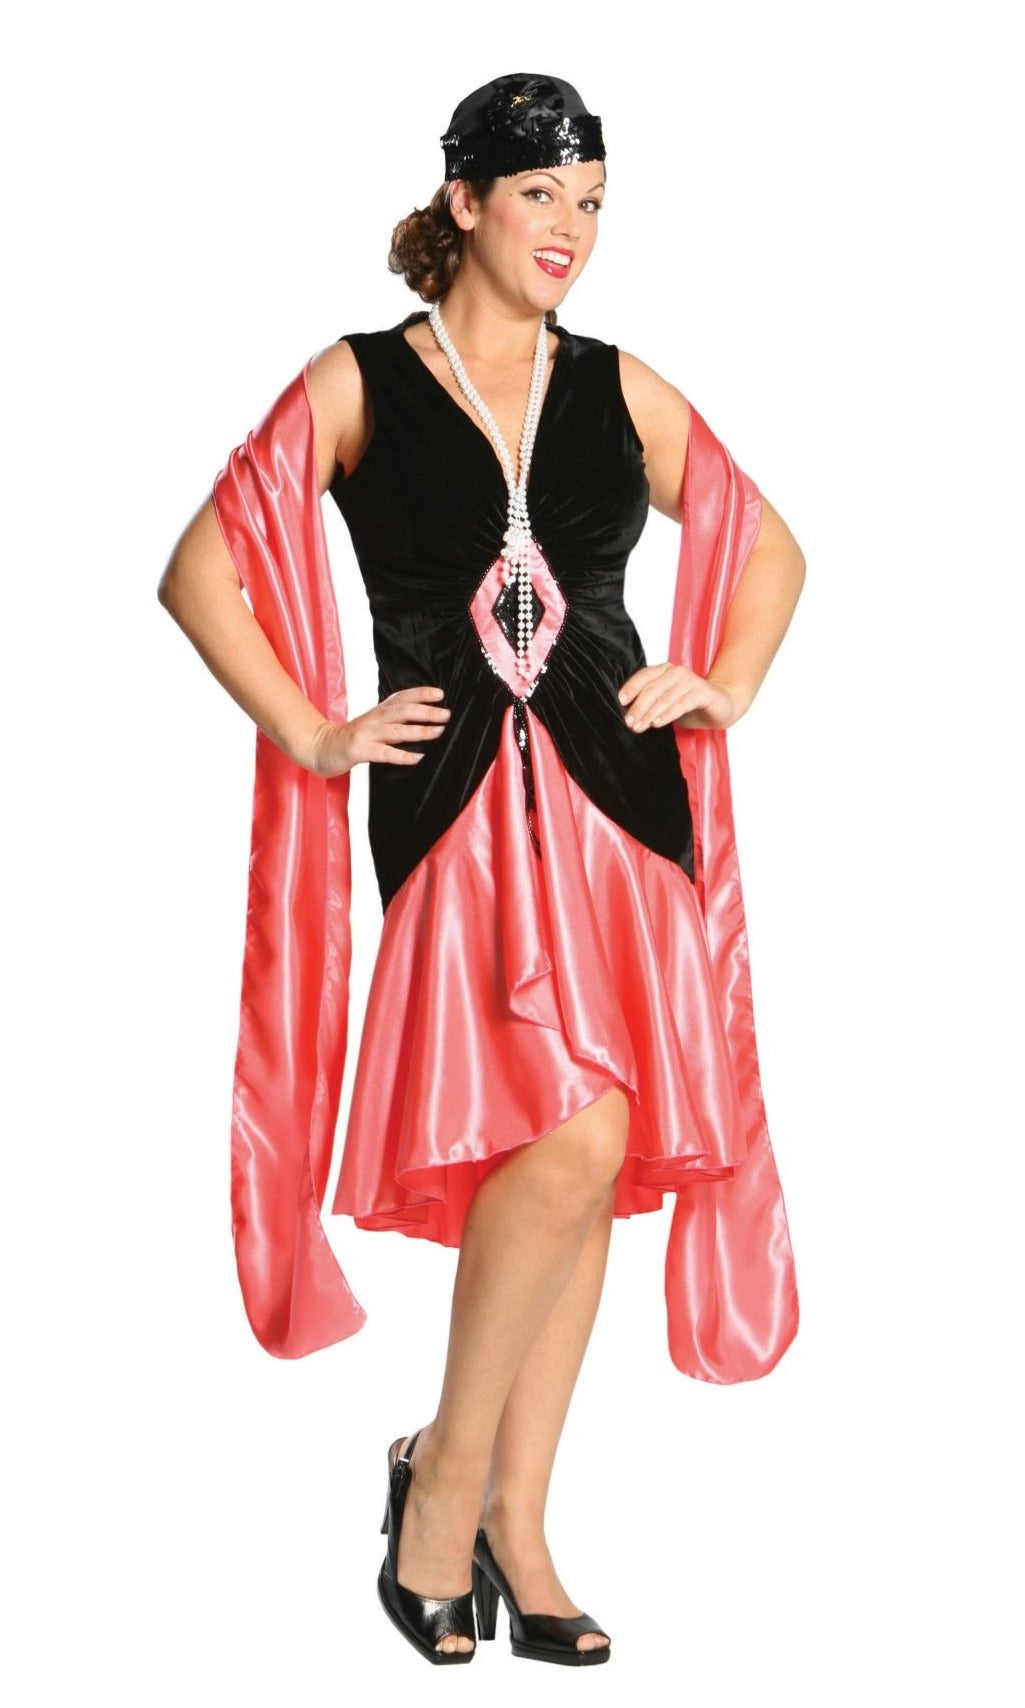 Coral and black Plus size 1920s flapper dress with hat and necklace